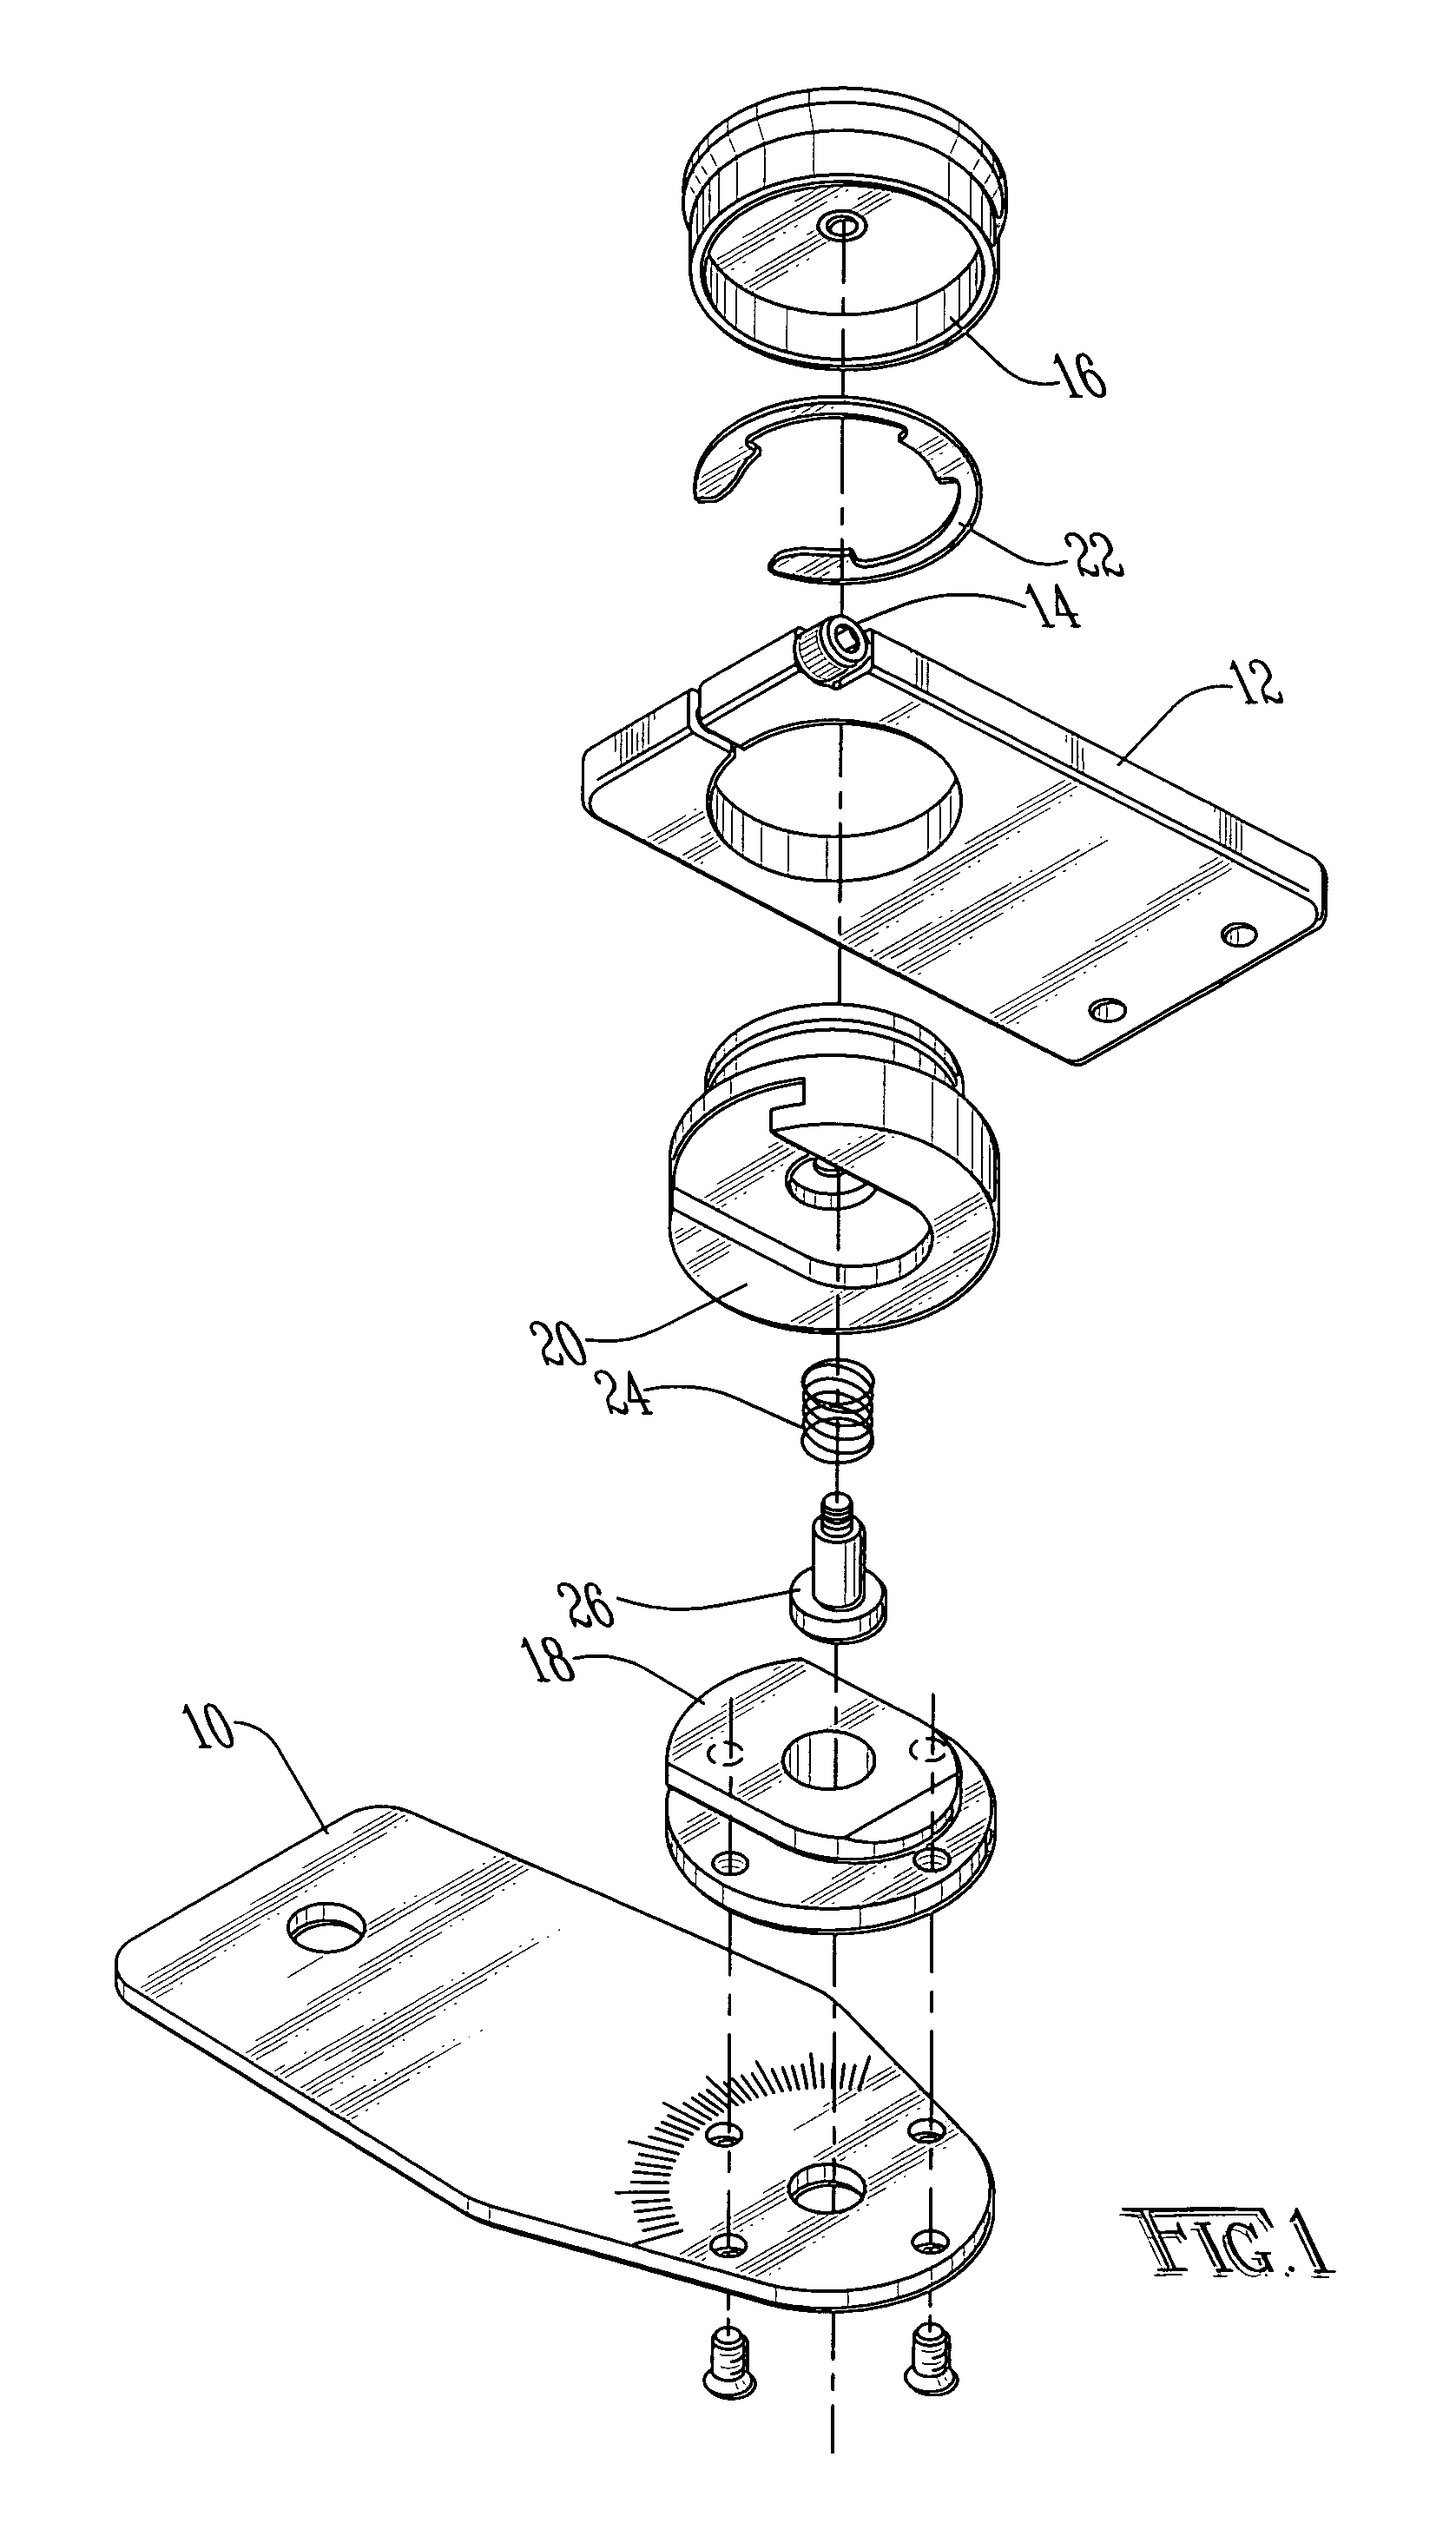 Orthosis and footwear attachment mechanism for same